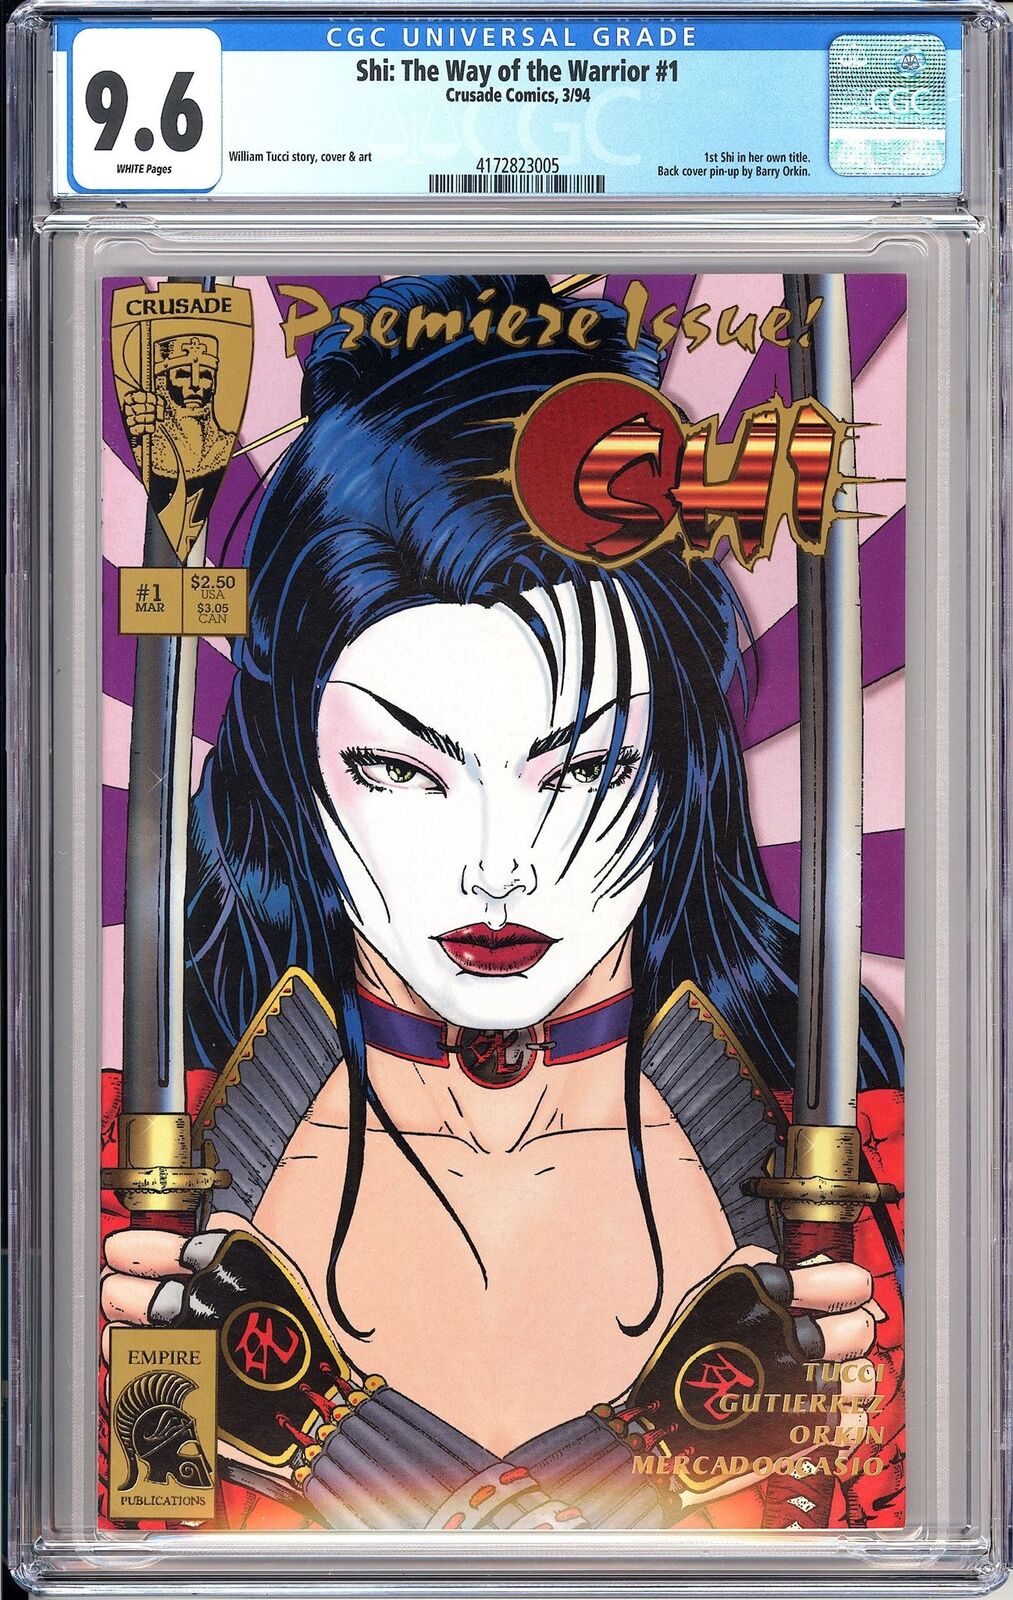 Shi Way of the Warrior 1 CGC 9.6 1994 4172823005 Gold Premiere Issue 1st Shi Key